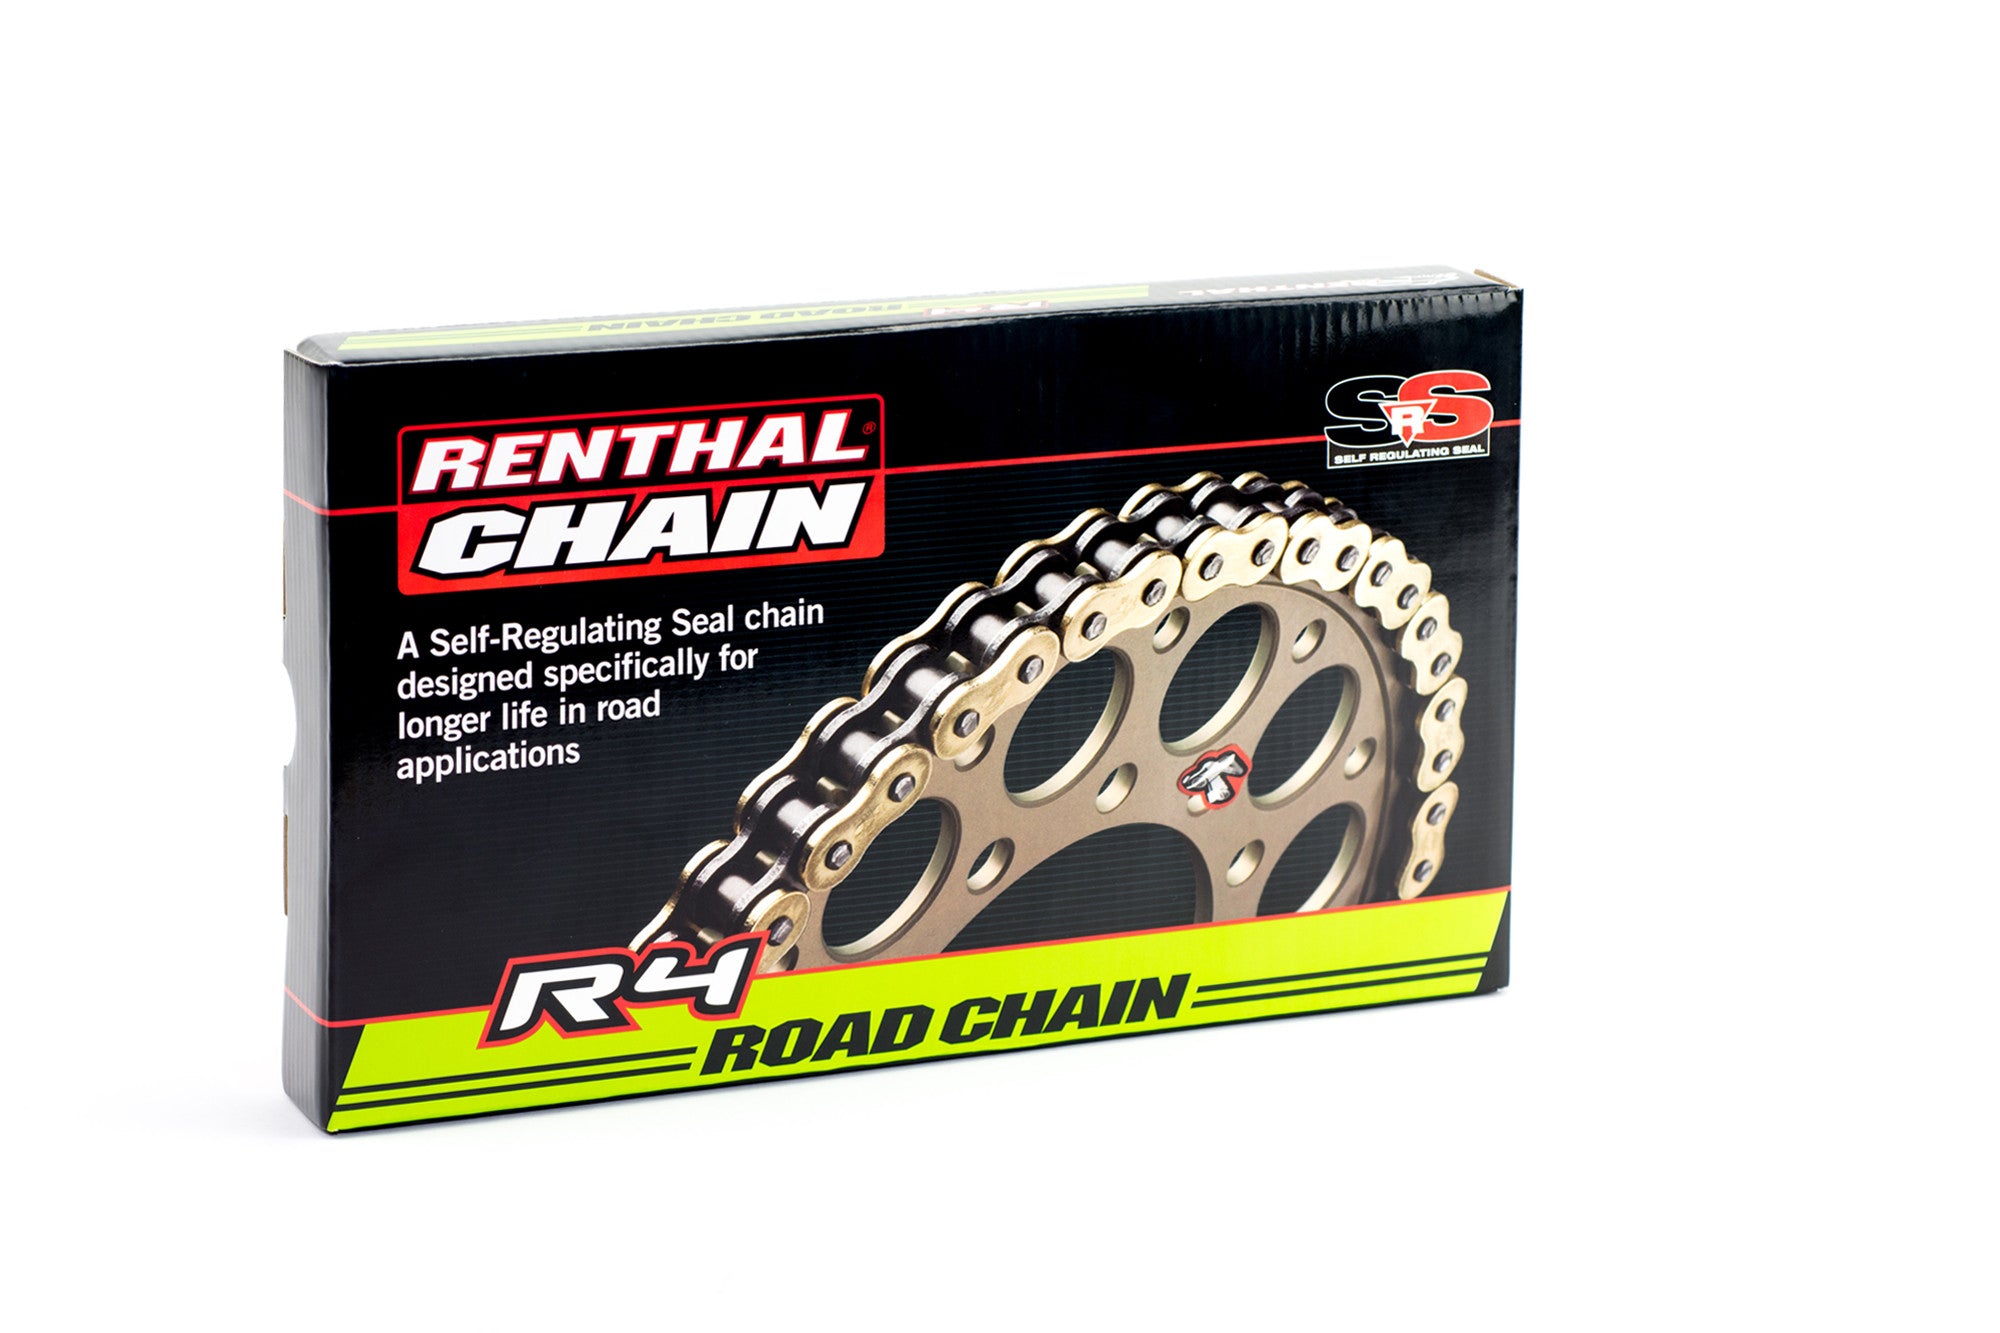 Renthal Chains